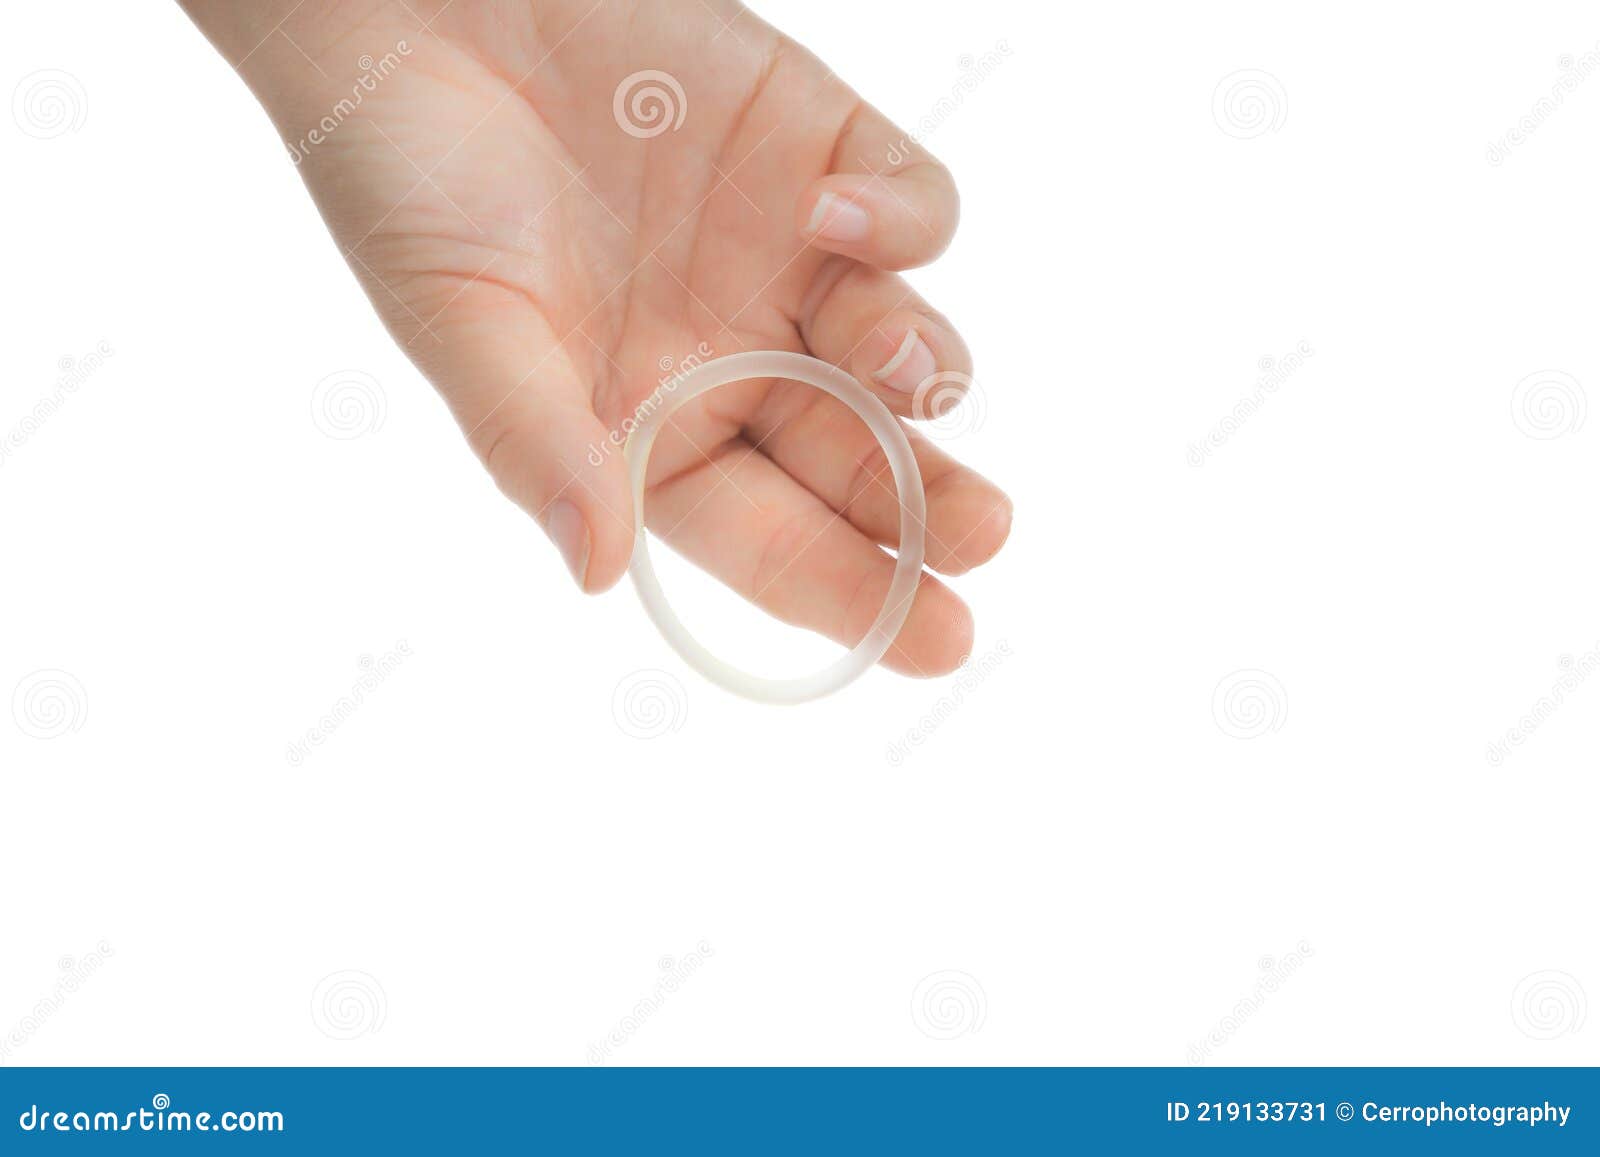 Moreland OB-GYN Associates, S.C. - The IUD moves on to the Championship  round of our Moreland OB-GYN Madness Birth Control Bracket; the vaginal ring  does not move on. Used on a monthly